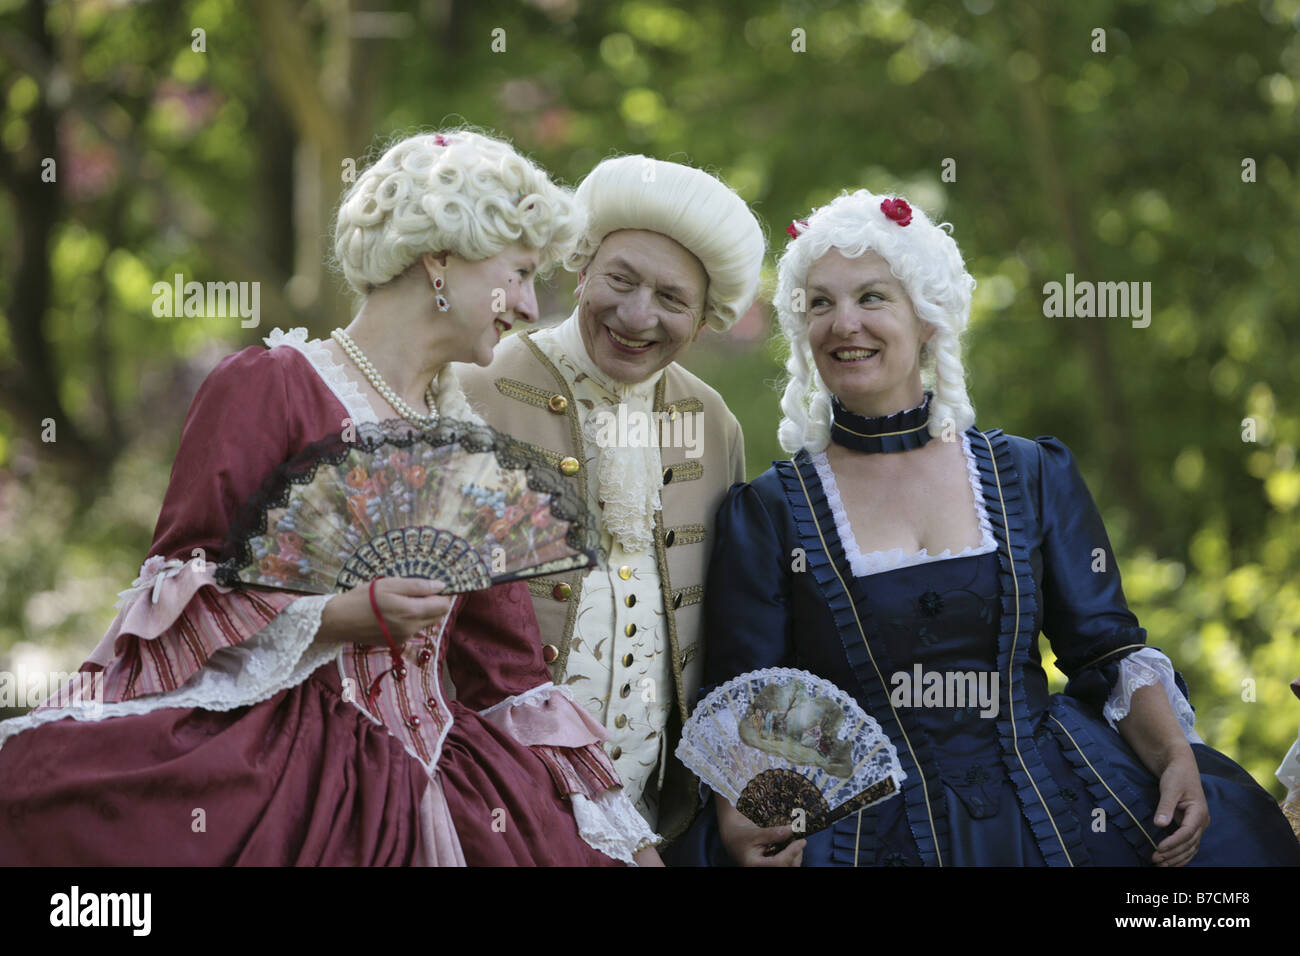 whispering fawning courtier in the baroque period, Germany, Saxony, Zwickau Stock Photo